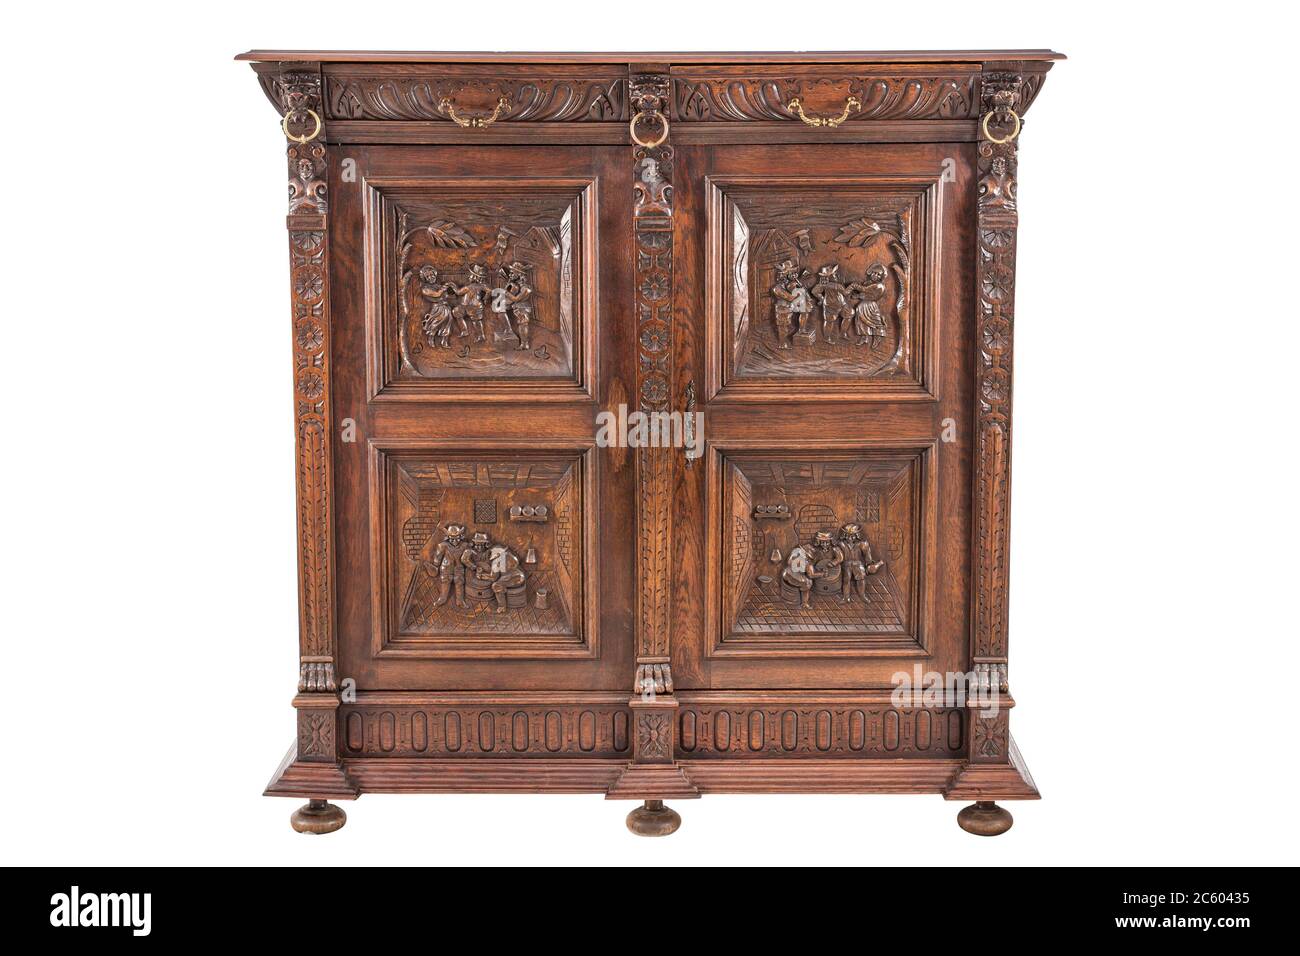 Old original European antique wooden carved sideboard buffet cabinet Stock Photo